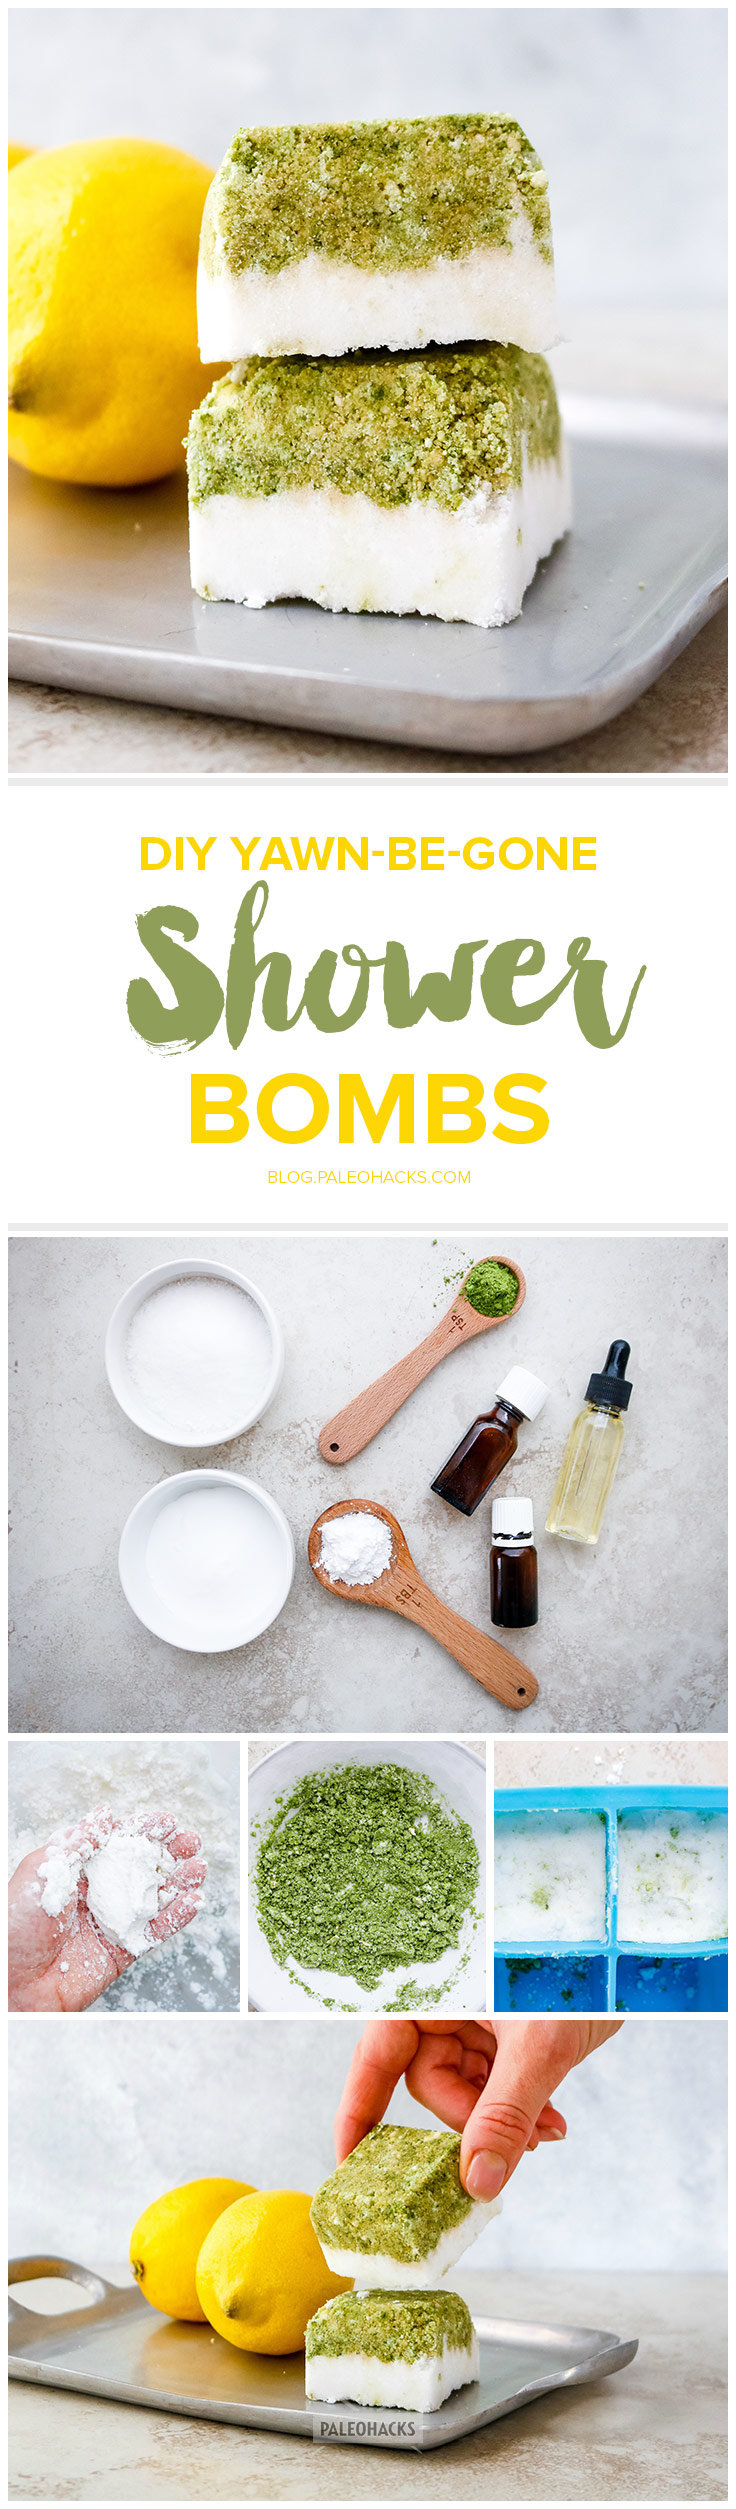 Skip the bathtub and awaken your senses with a bit of shower steam and soothing essential oils. Mornings never smelled so good!